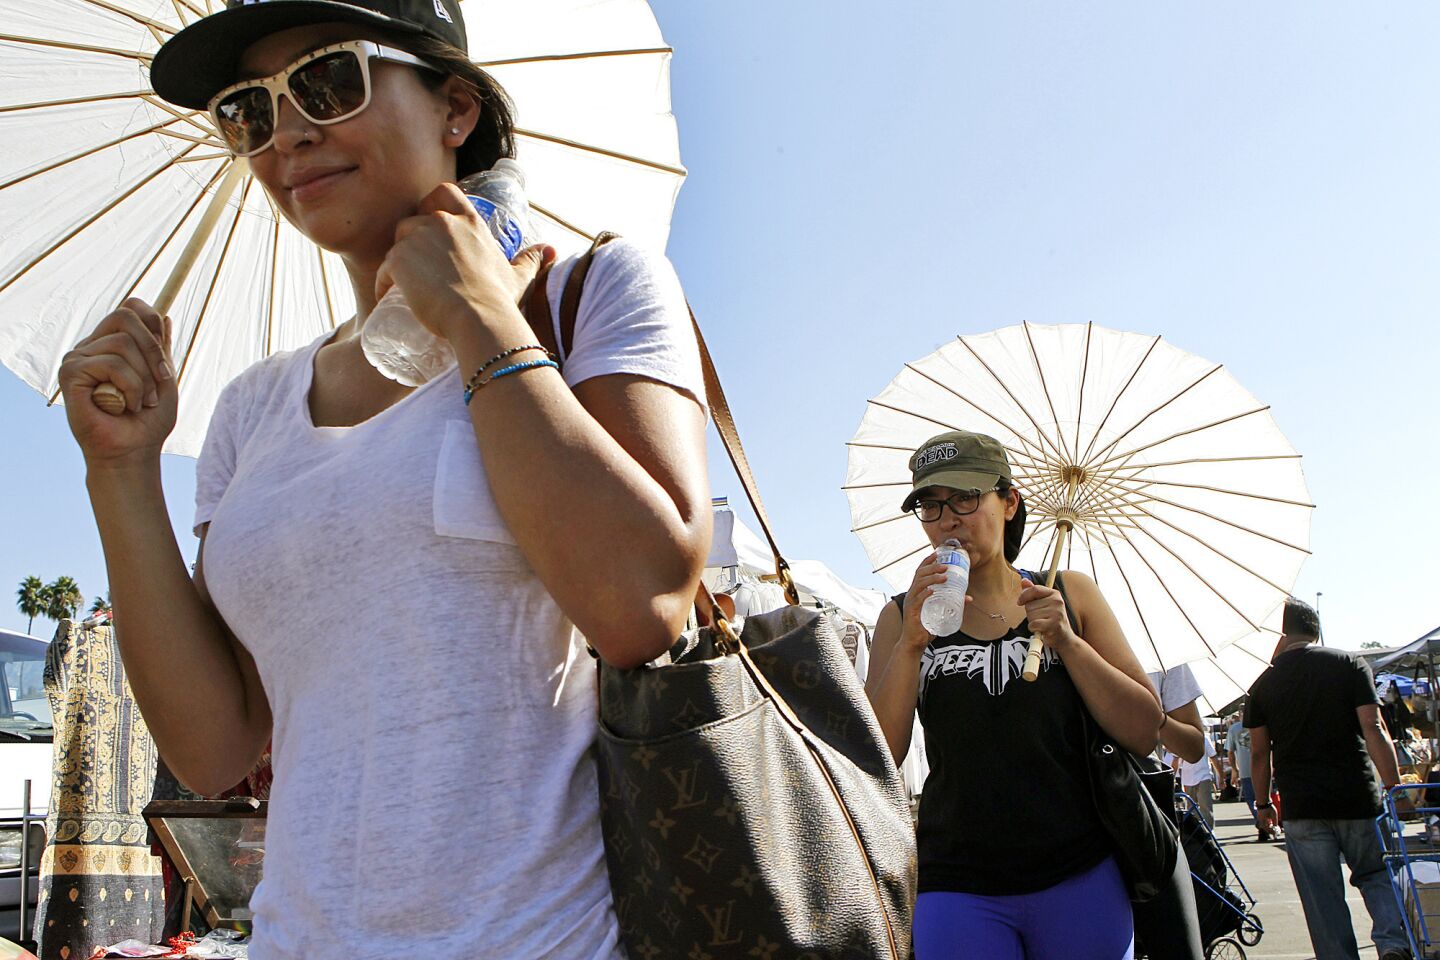 Sandra Figueroa, left, and her sister Elizabeth try to beat the heat at the Rose Bowl in Pasadena while shopping at the monthly flea market on Sunday.